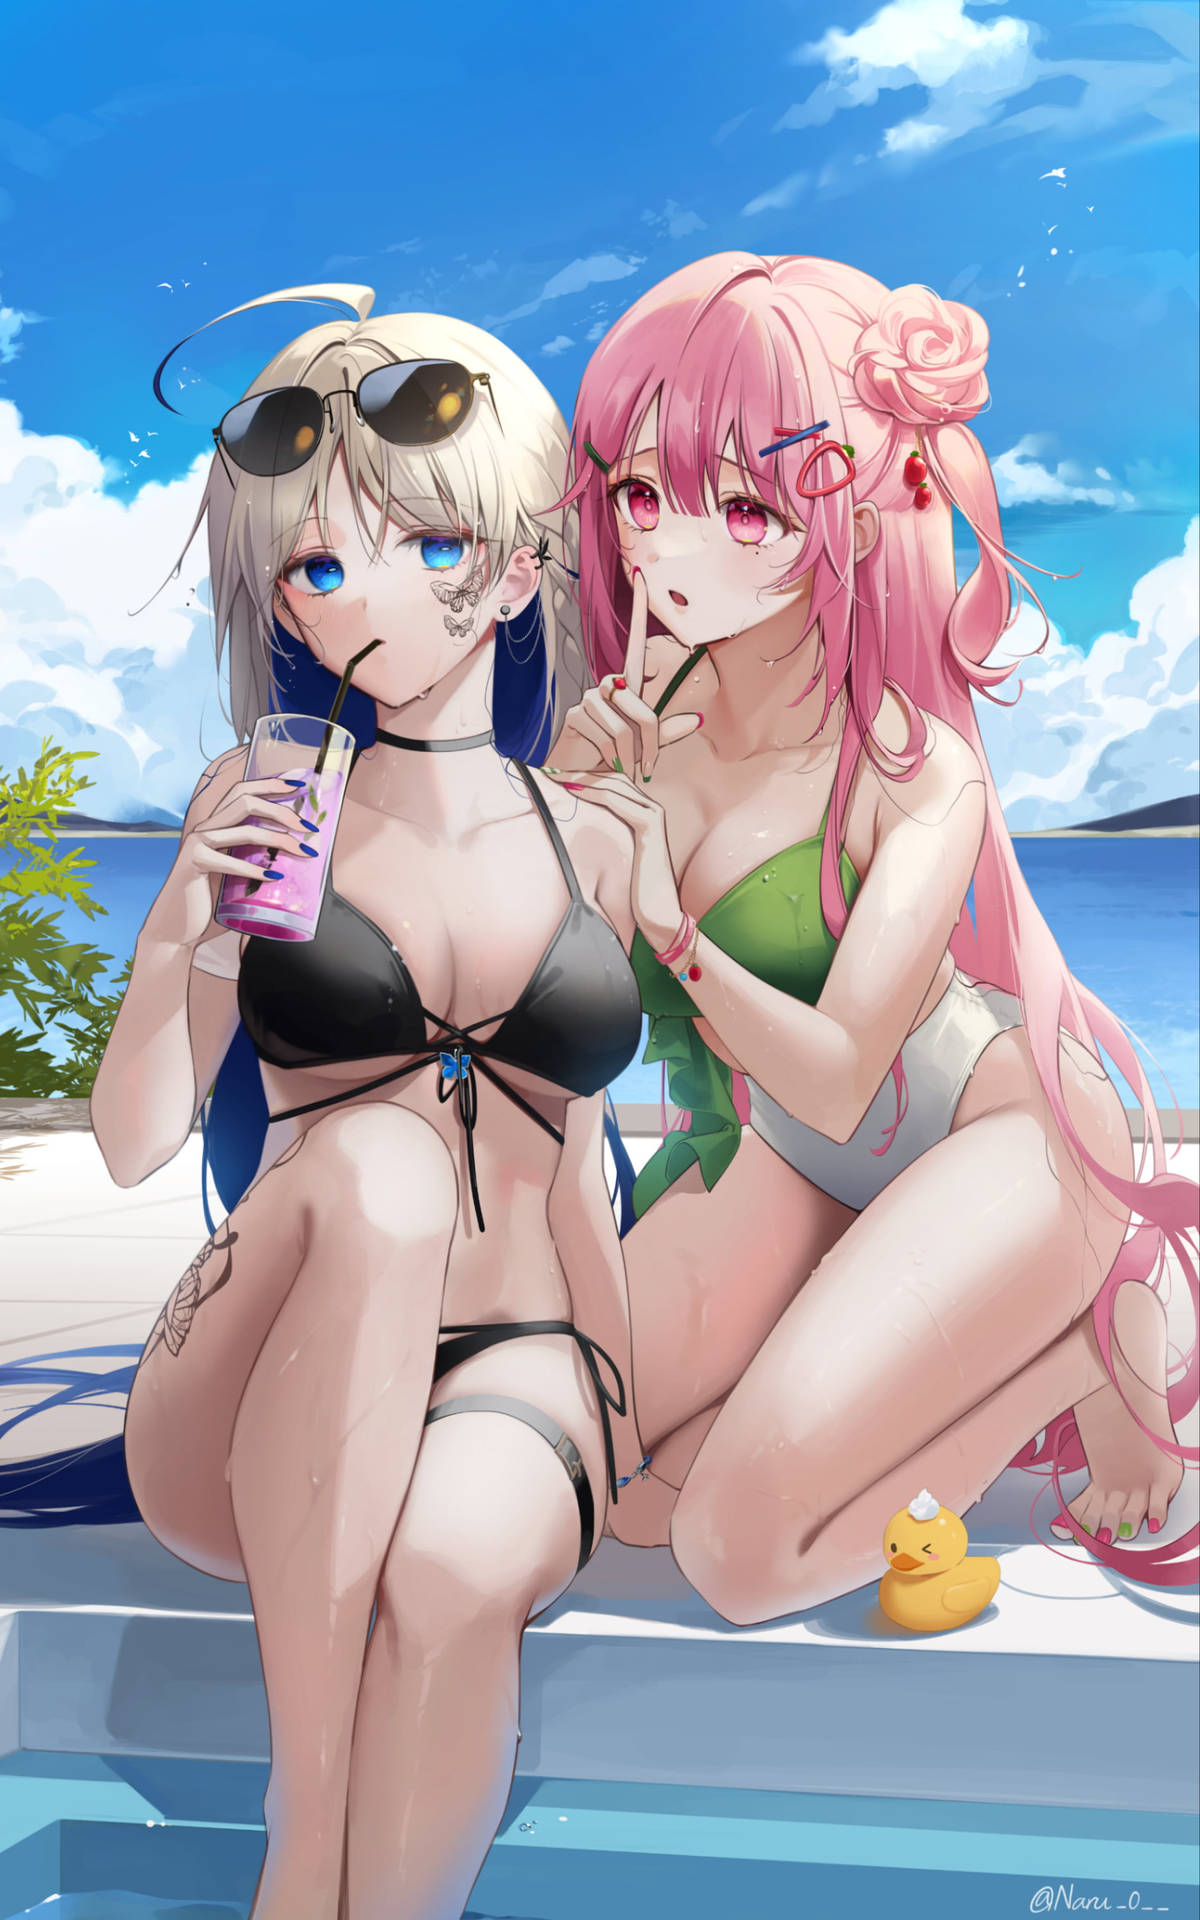 Two Ecchi Girls On Vacation Wallpaper